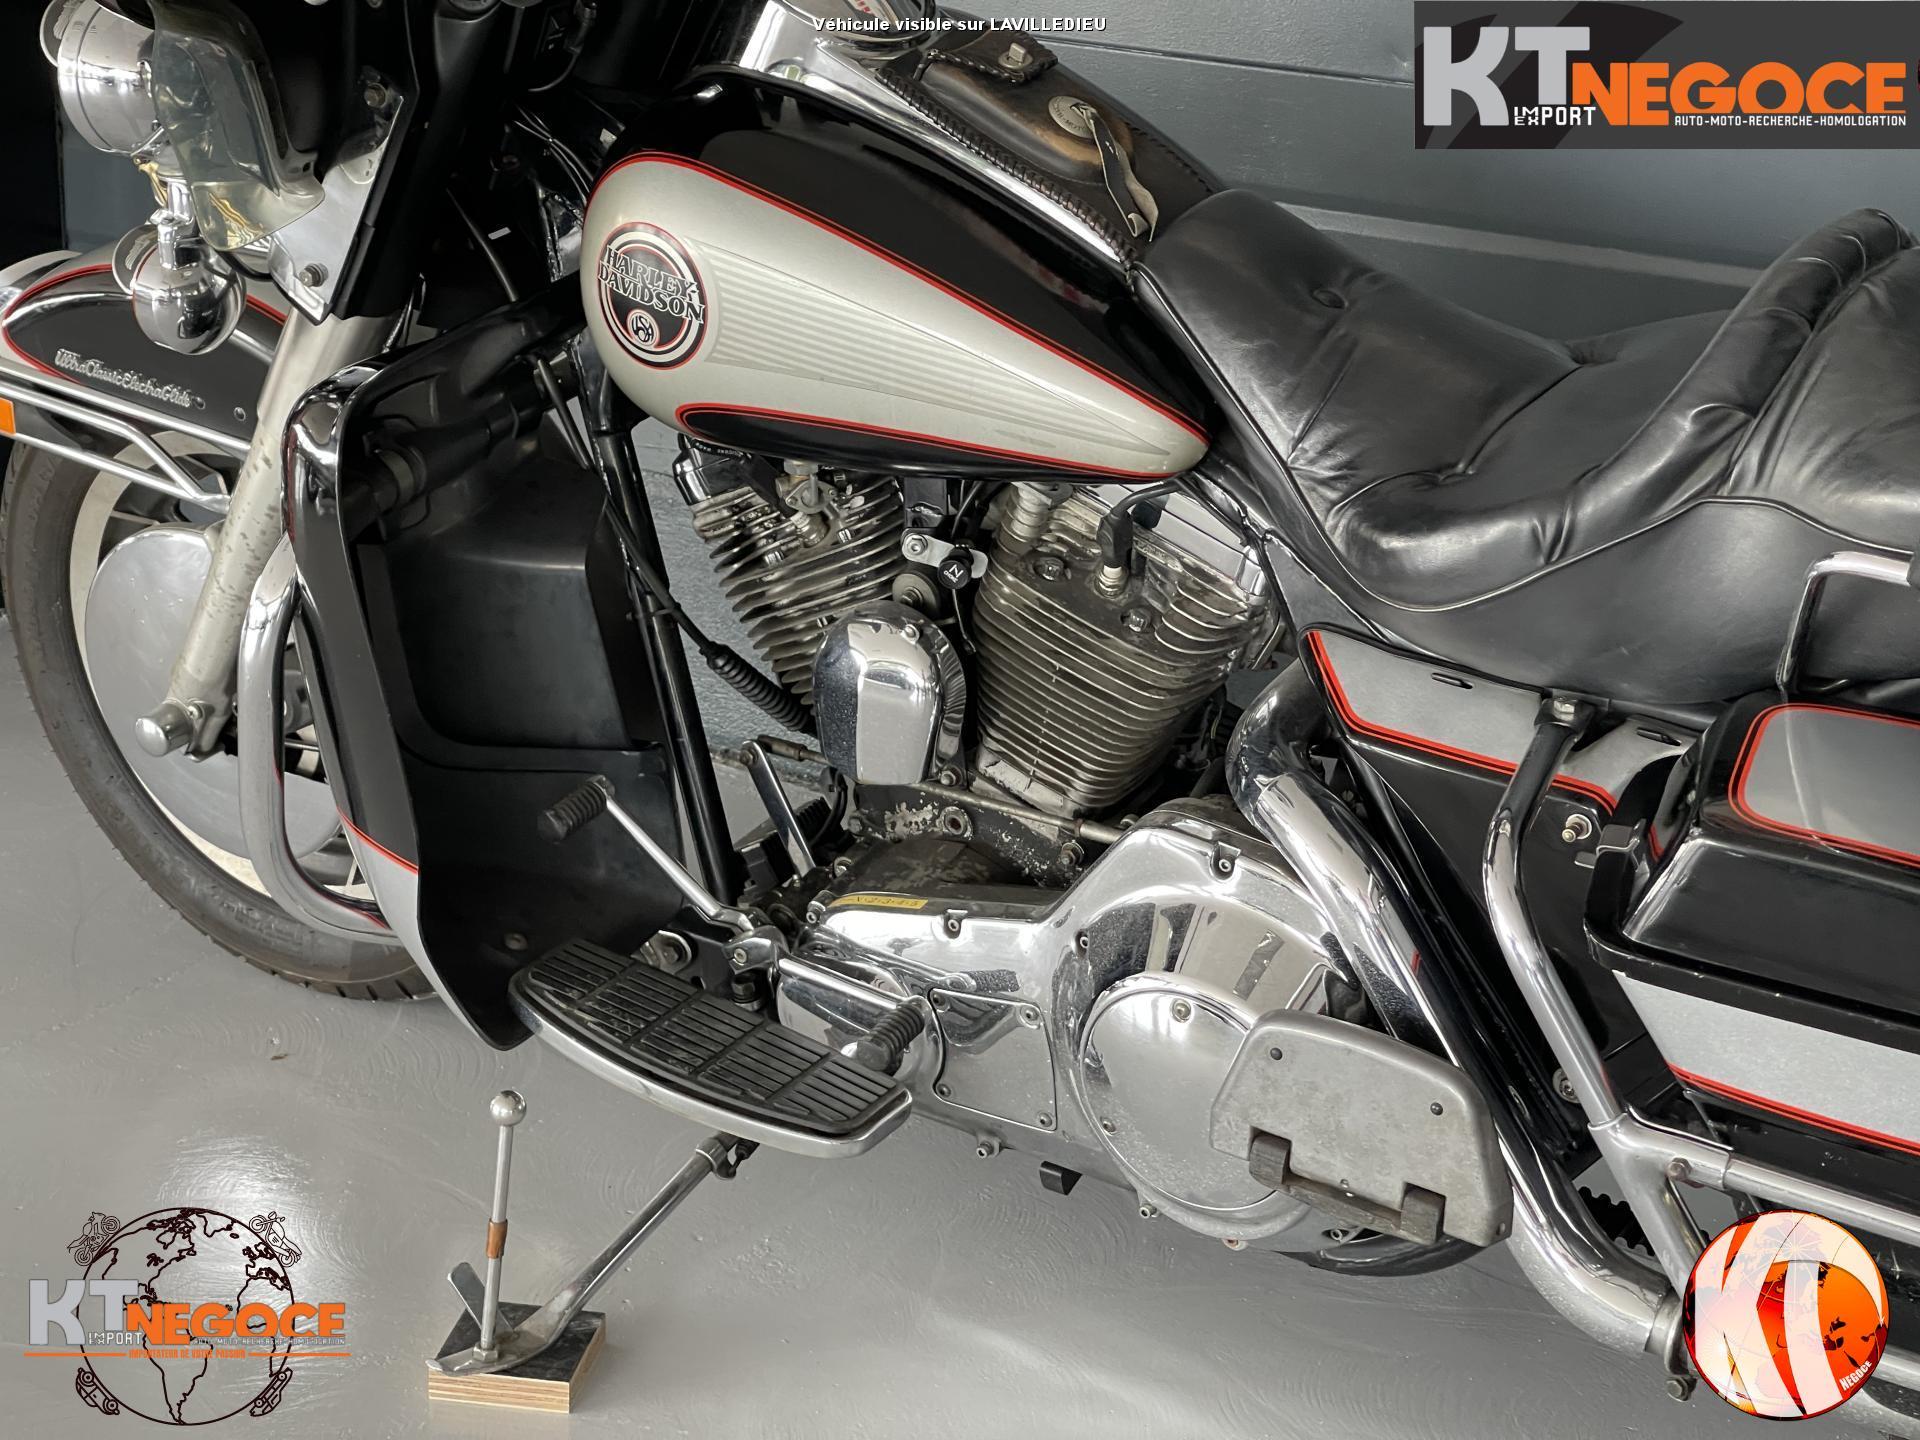 Echappement + Bande thermique pour Harley Electra Glide Ultra Classic 89-16  SA2